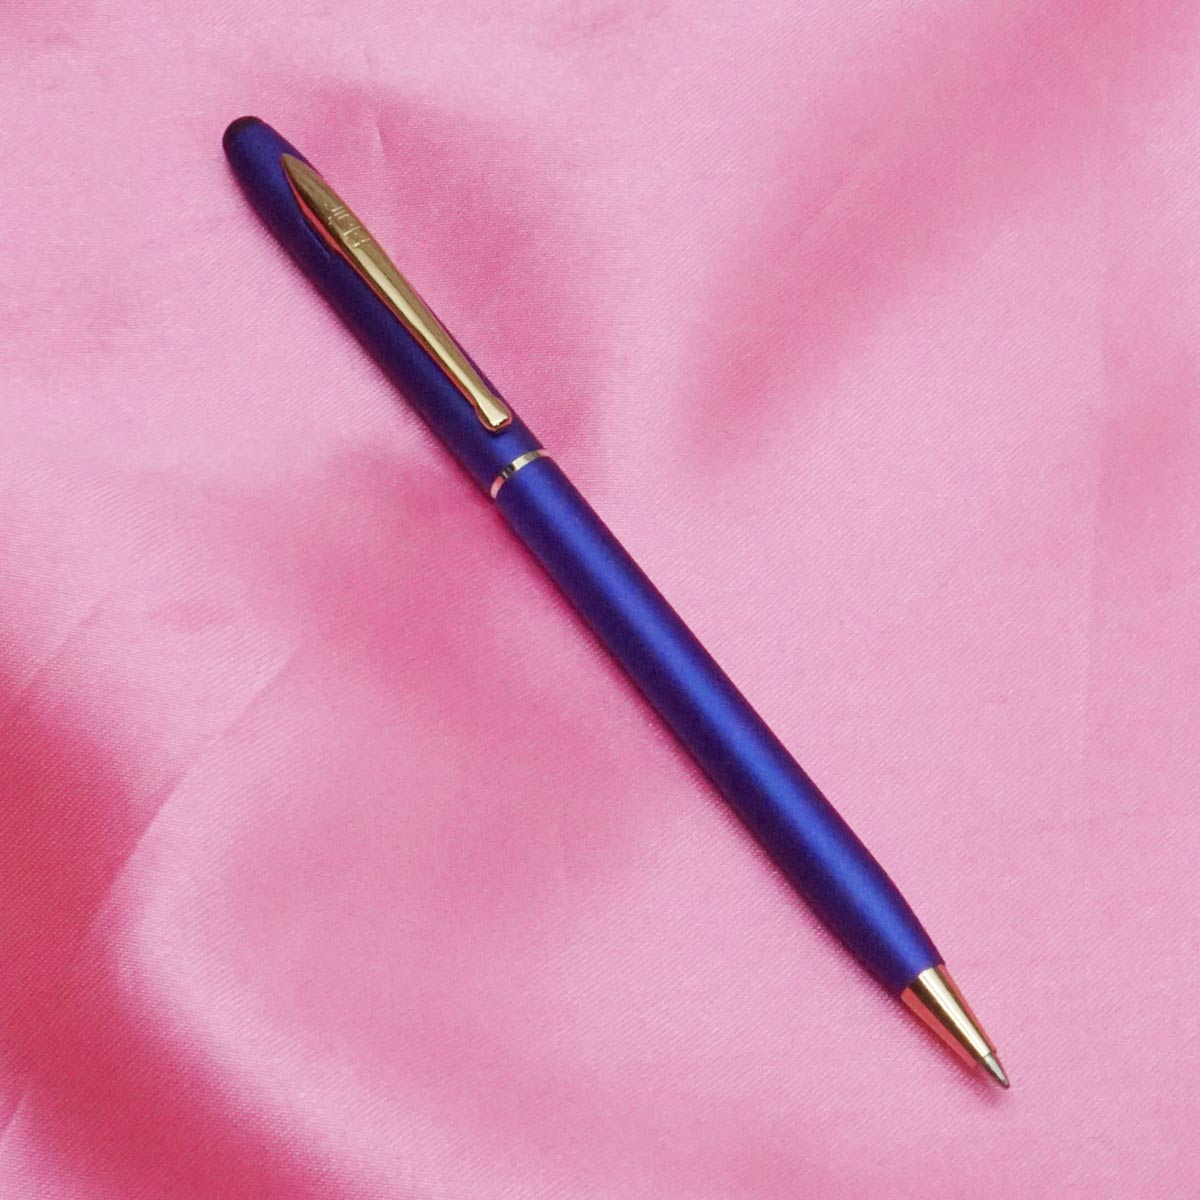 Flair Spectra Blue Color Body With Stylus Medium Tip Twist Type Ball Pen SKU 21762